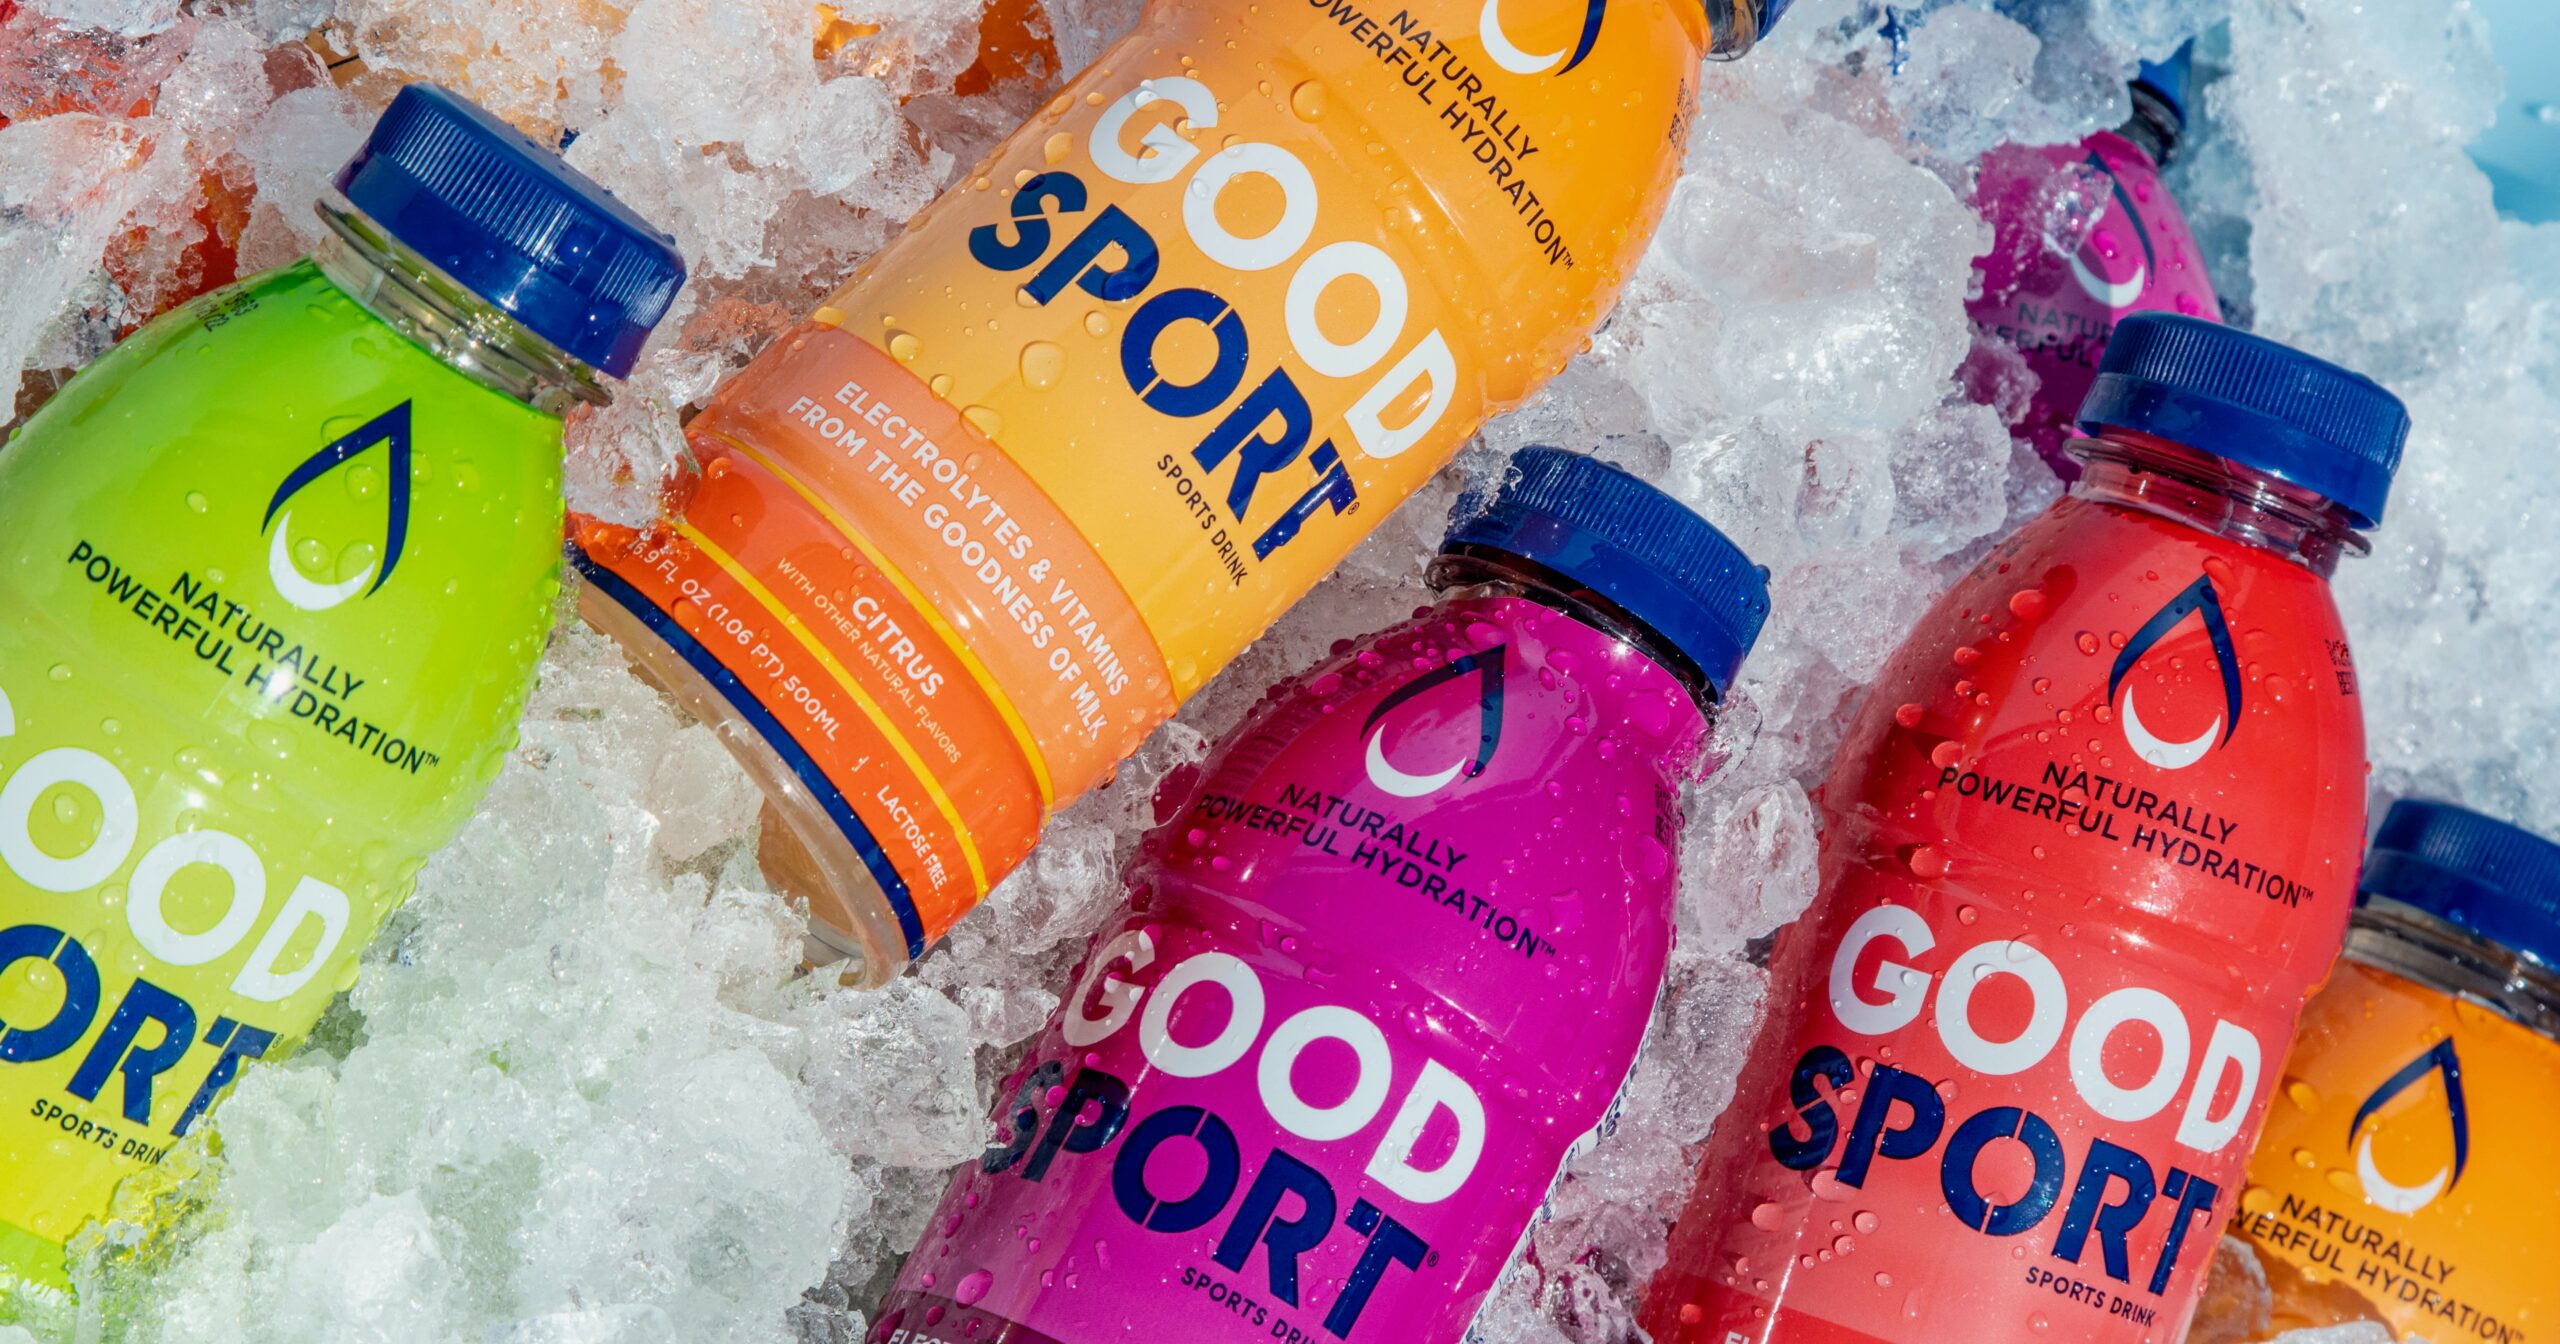 GoodSport CEO tells the story behind new milk-based sports activities drink